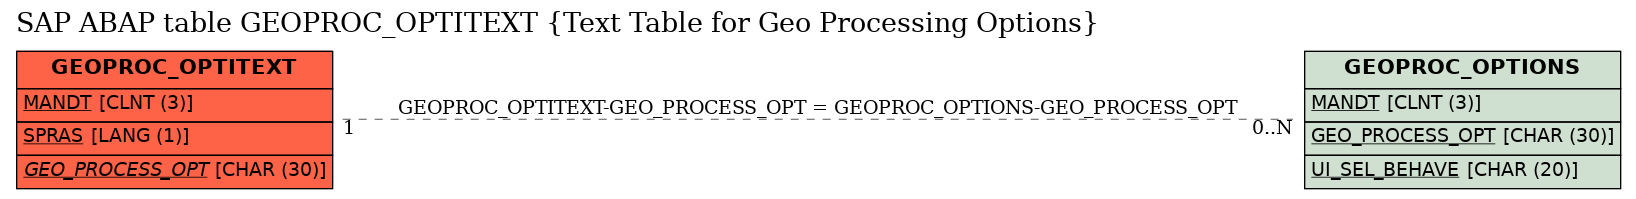 E-R Diagram for table GEOPROC_OPTITEXT (Text Table for Geo Processing Options)